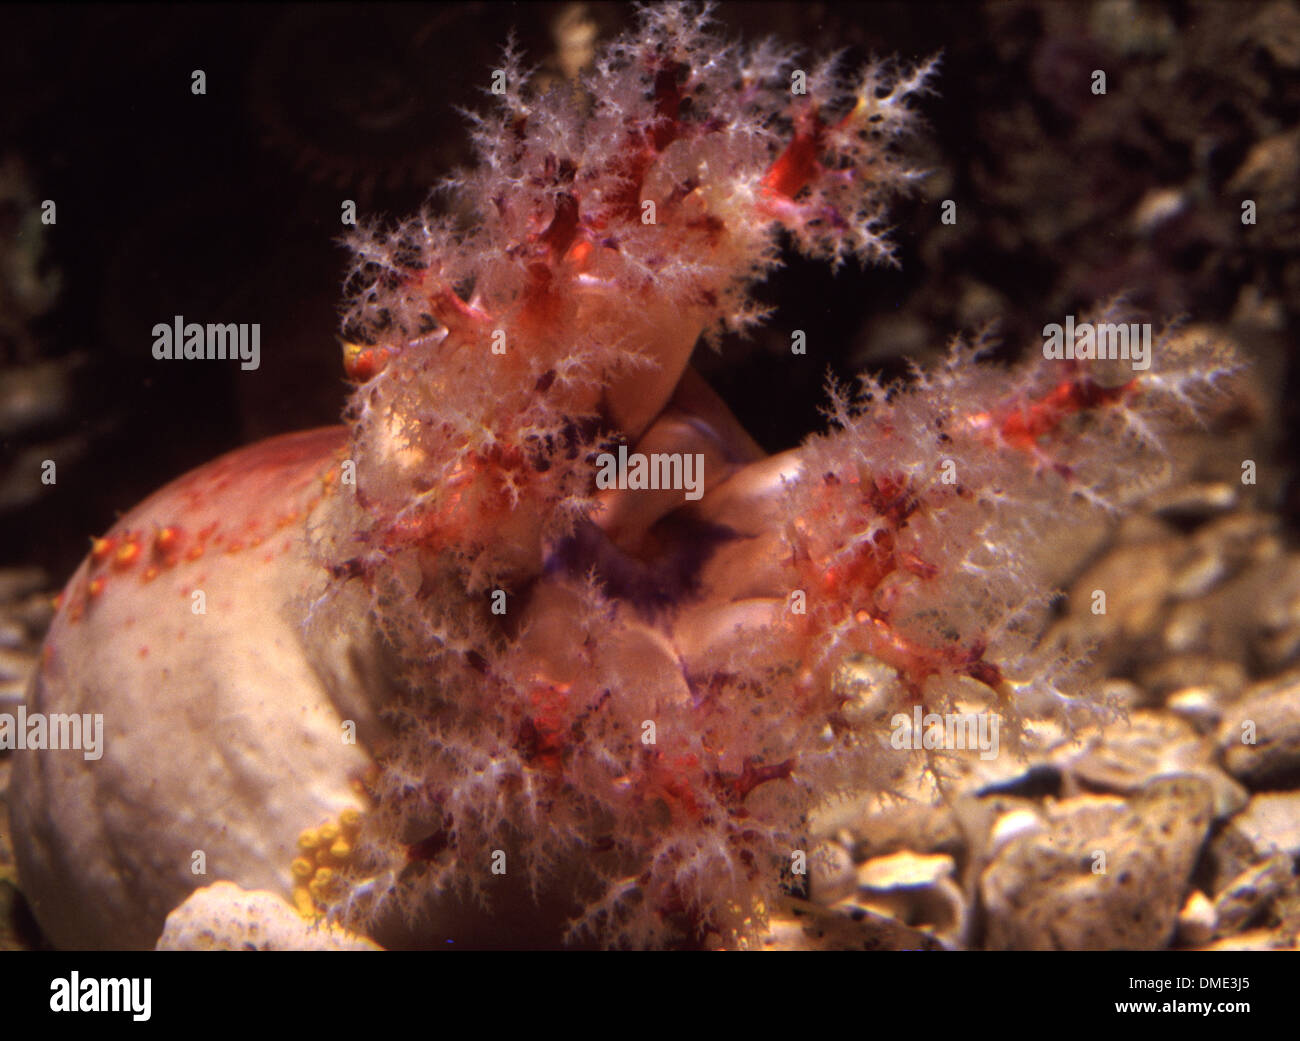 Tropical sea cucumber (Pseudocolochirus violaceus) feeding by tentacles filtration Stock Photo